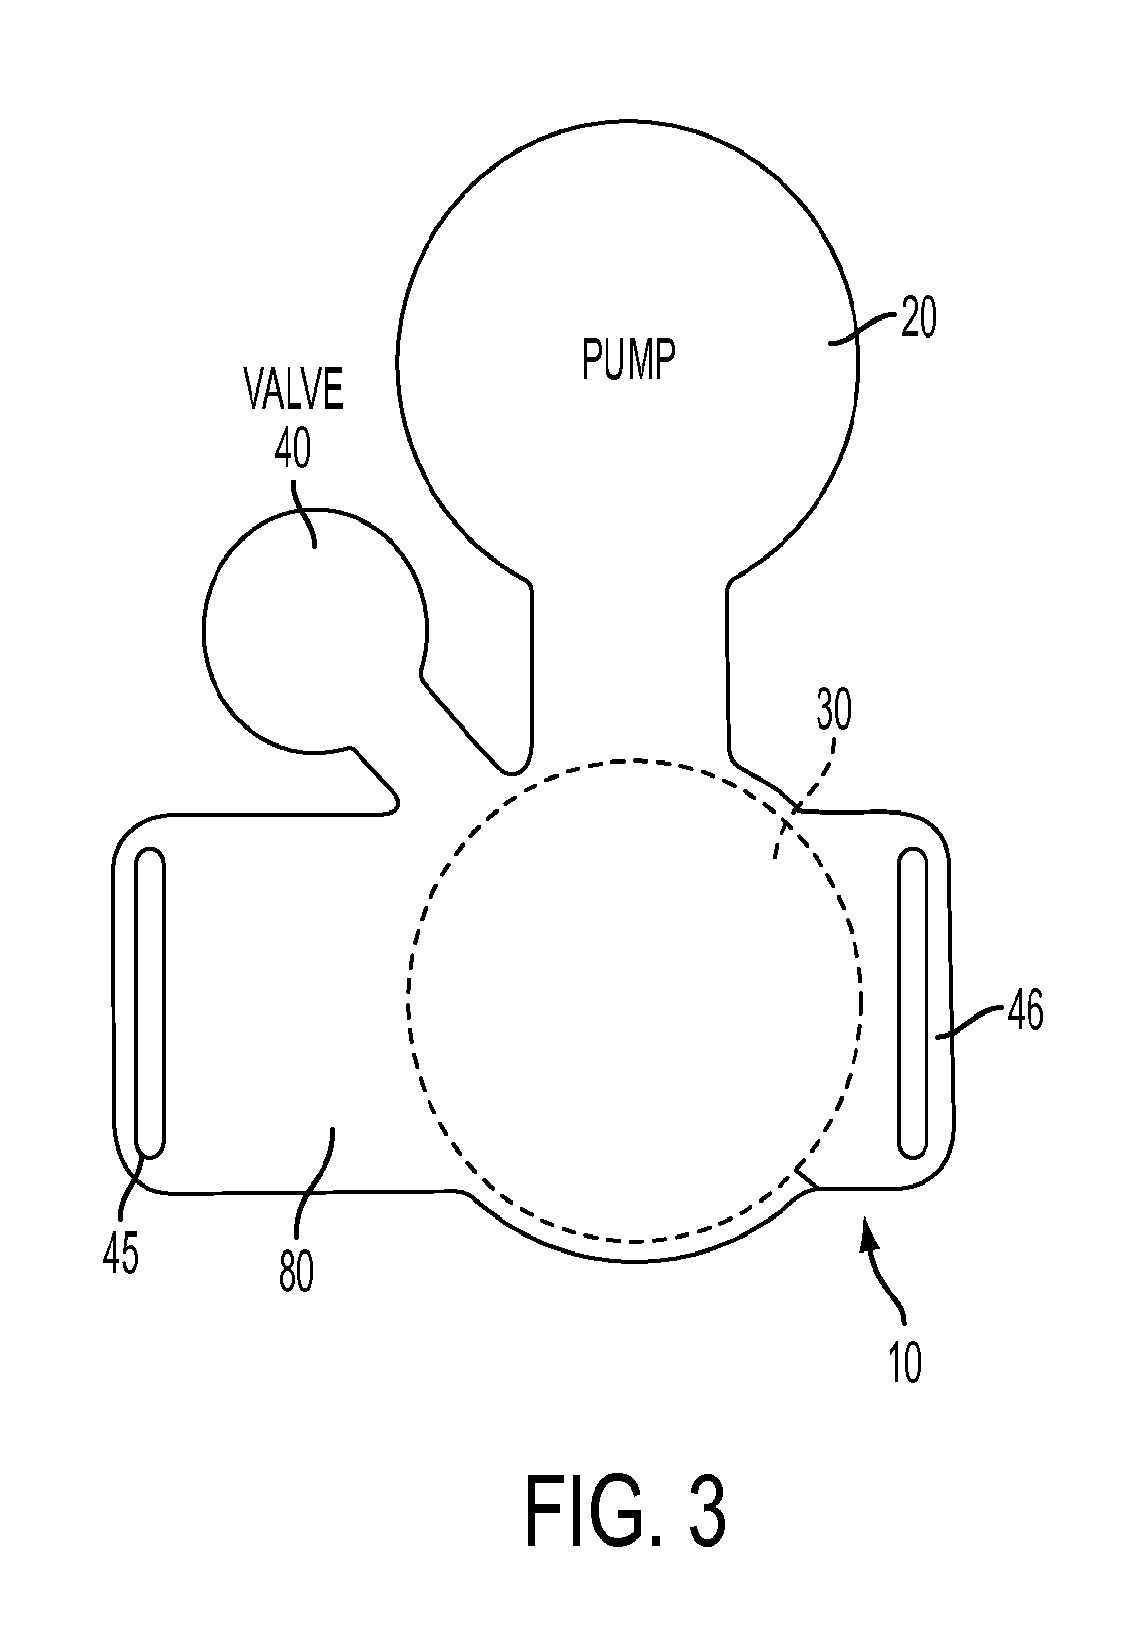 Methods and apparatus for a manual radial artery compression device